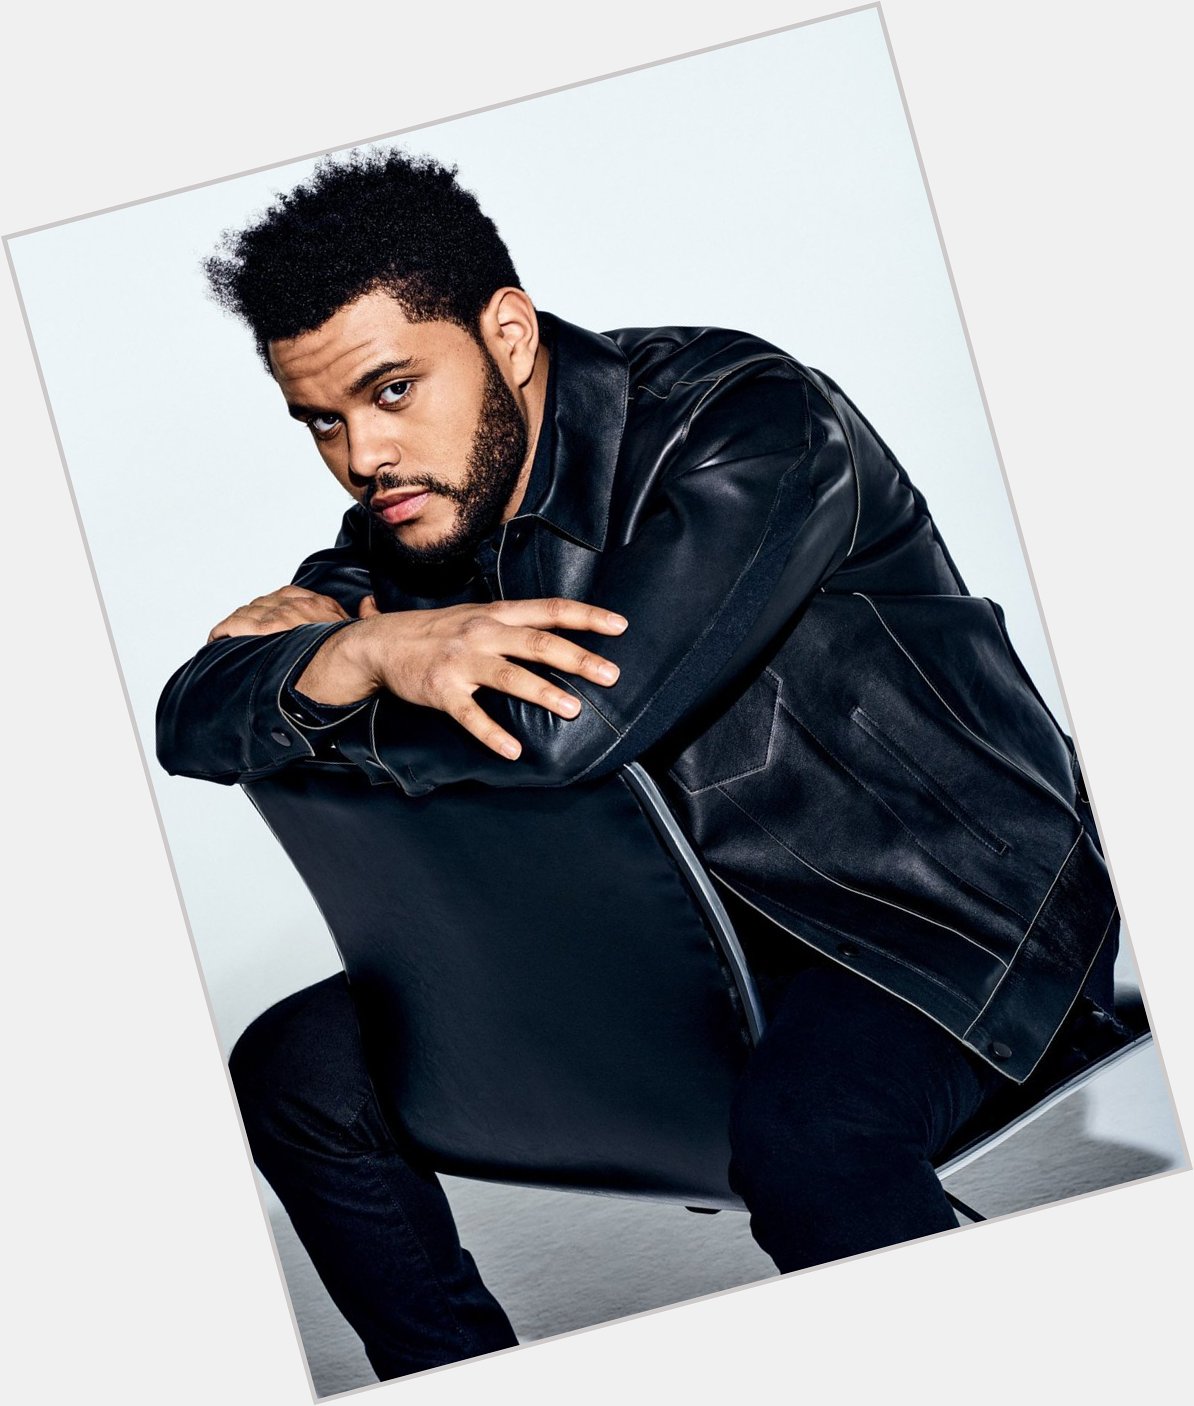 It s my man s birthday today. But seriously happy birthday to one of my favourite artists, The Weeknd  